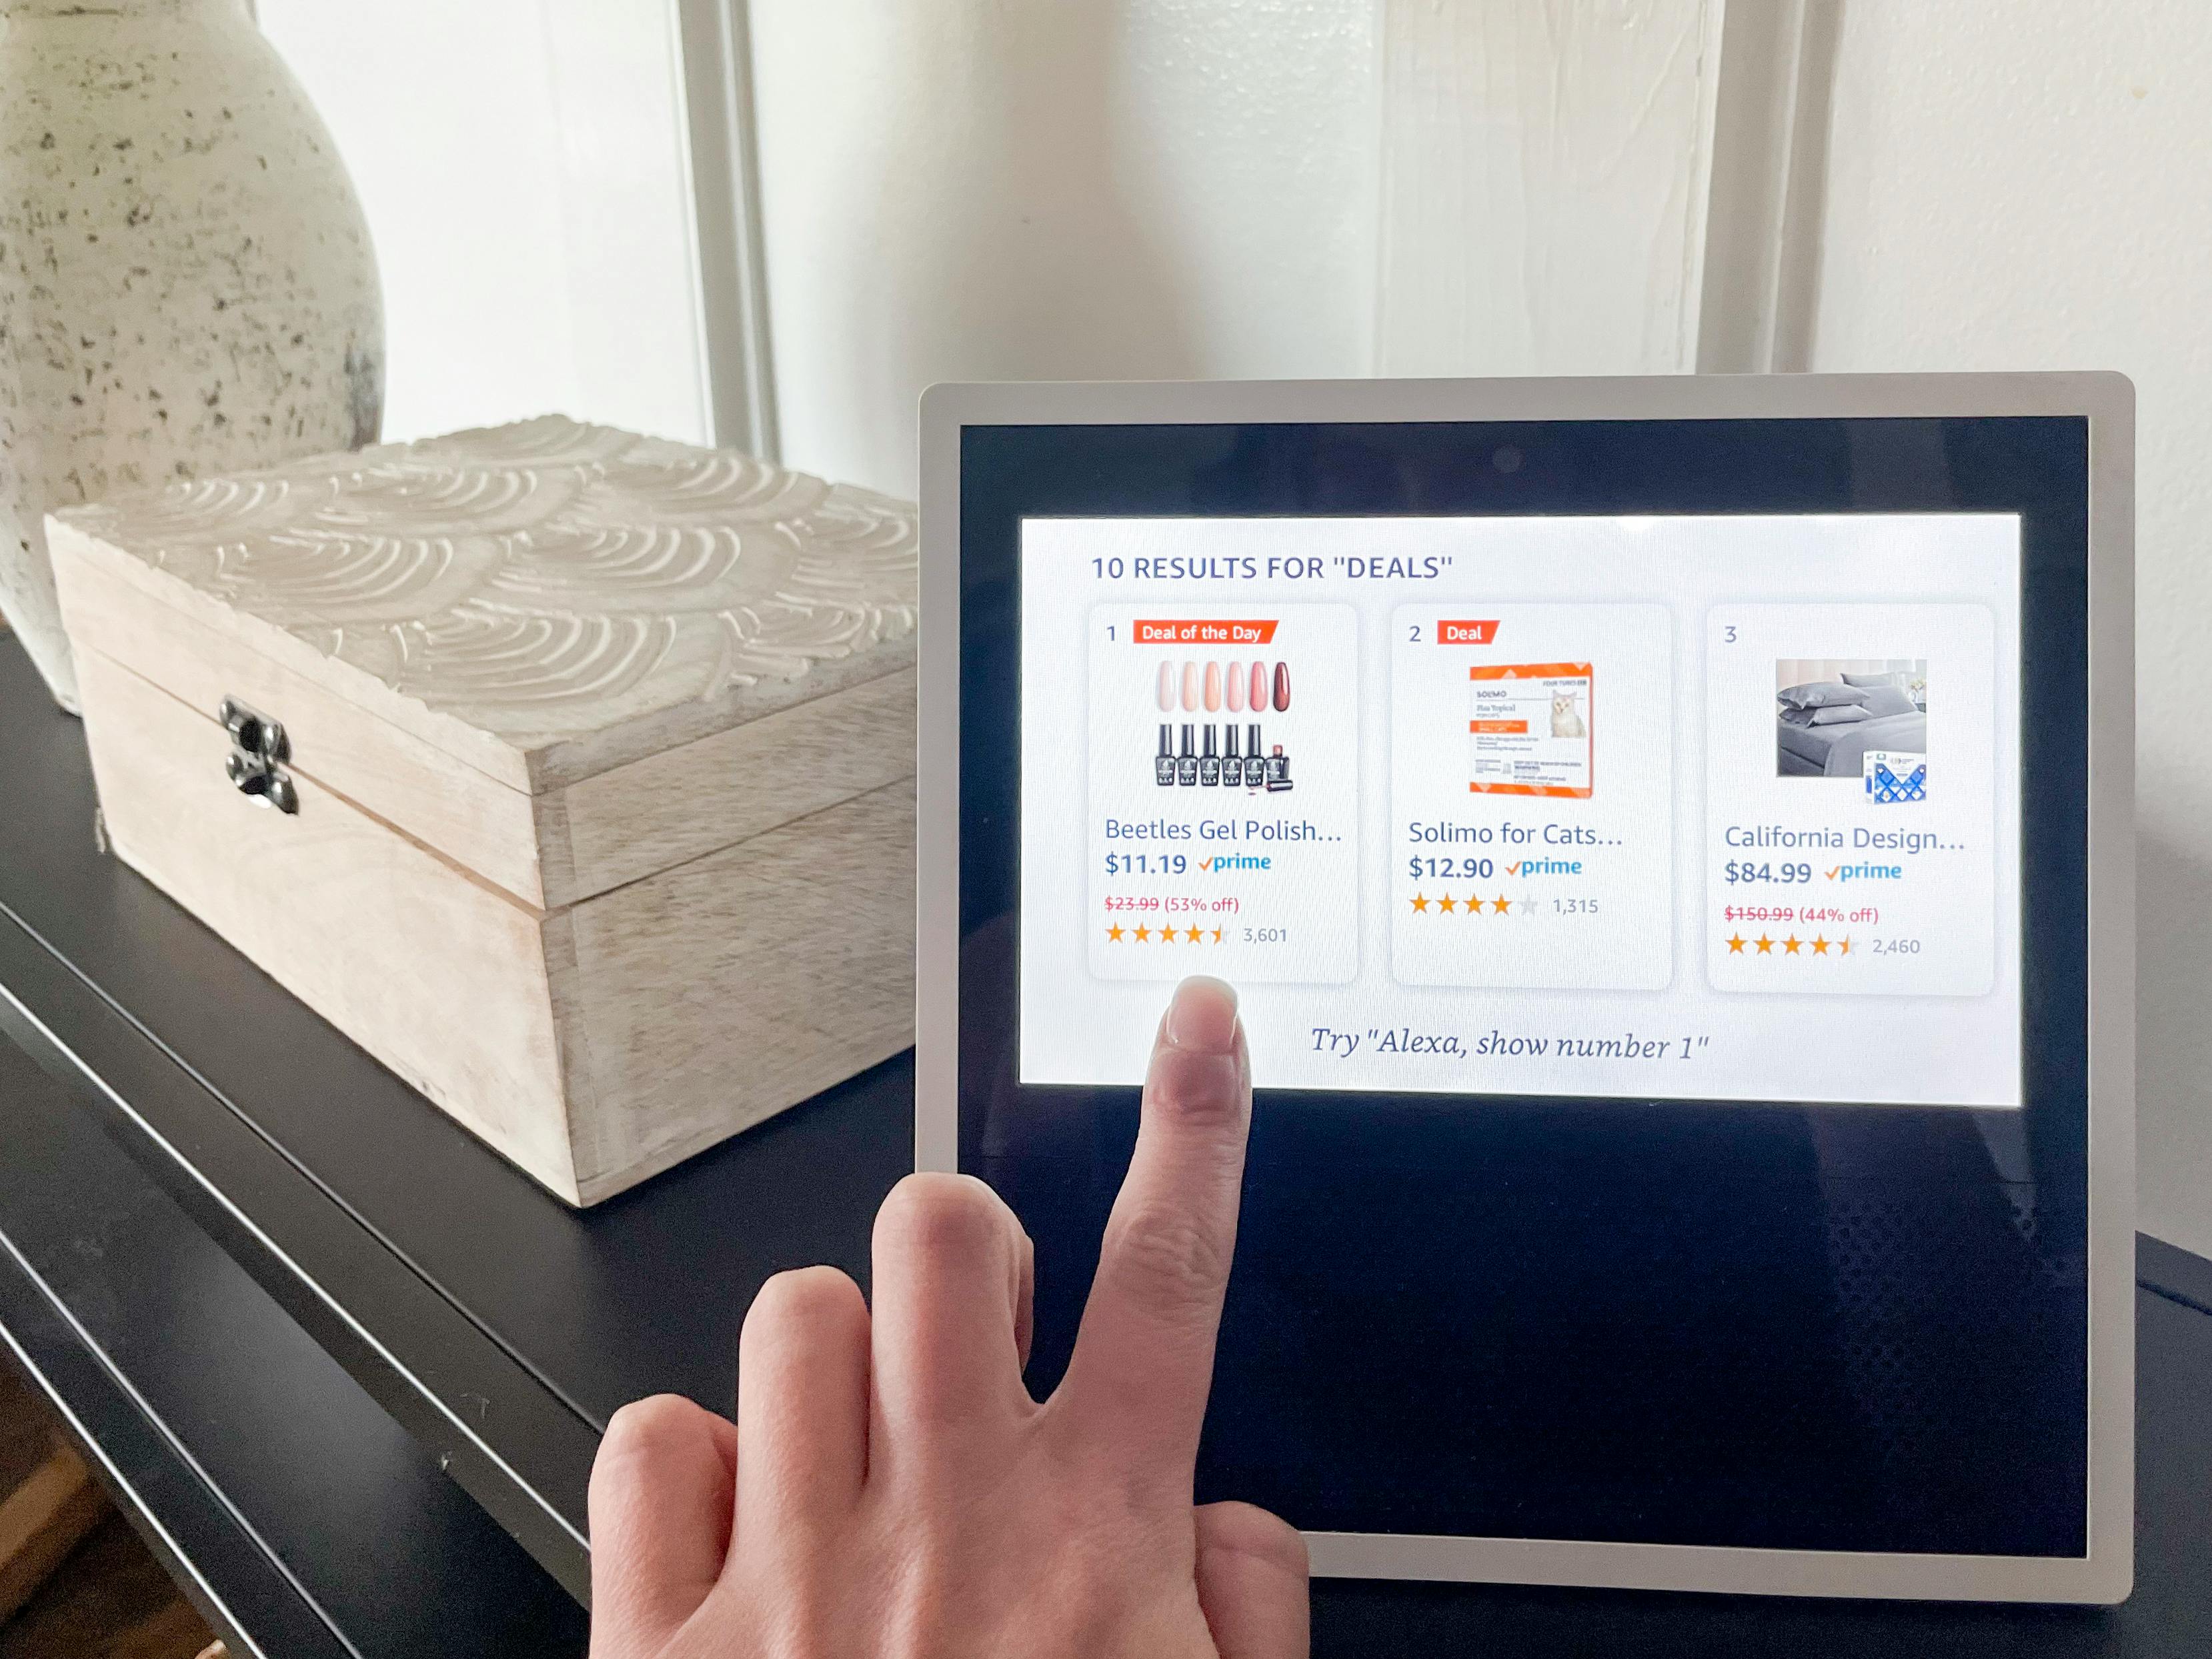 A person clicking on a deal on an Amazon Echo Show device